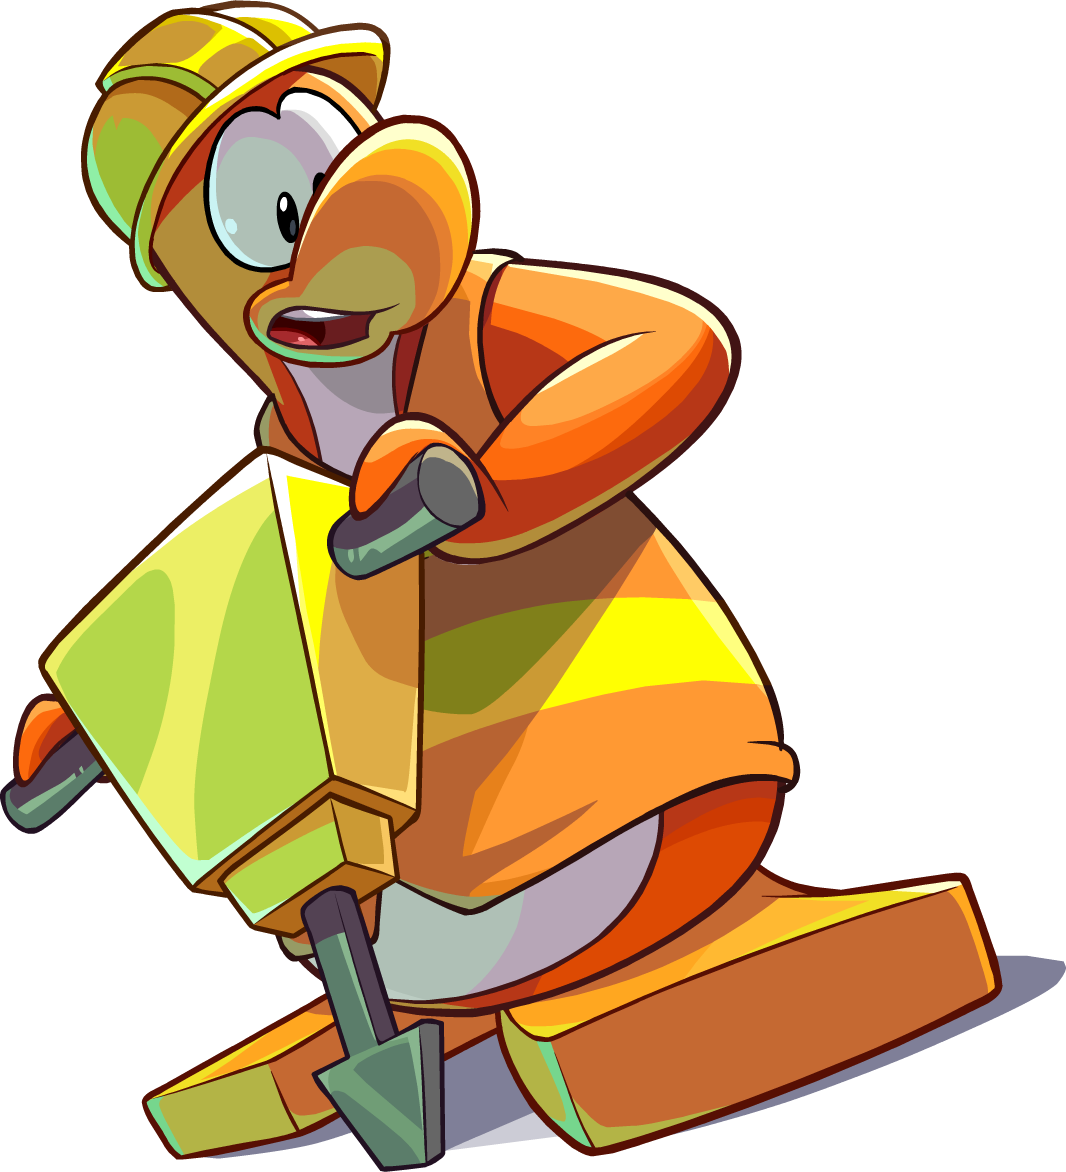 Newspaper Issue 420 Construction Worker - Club Penguin Rory (1066x1172)